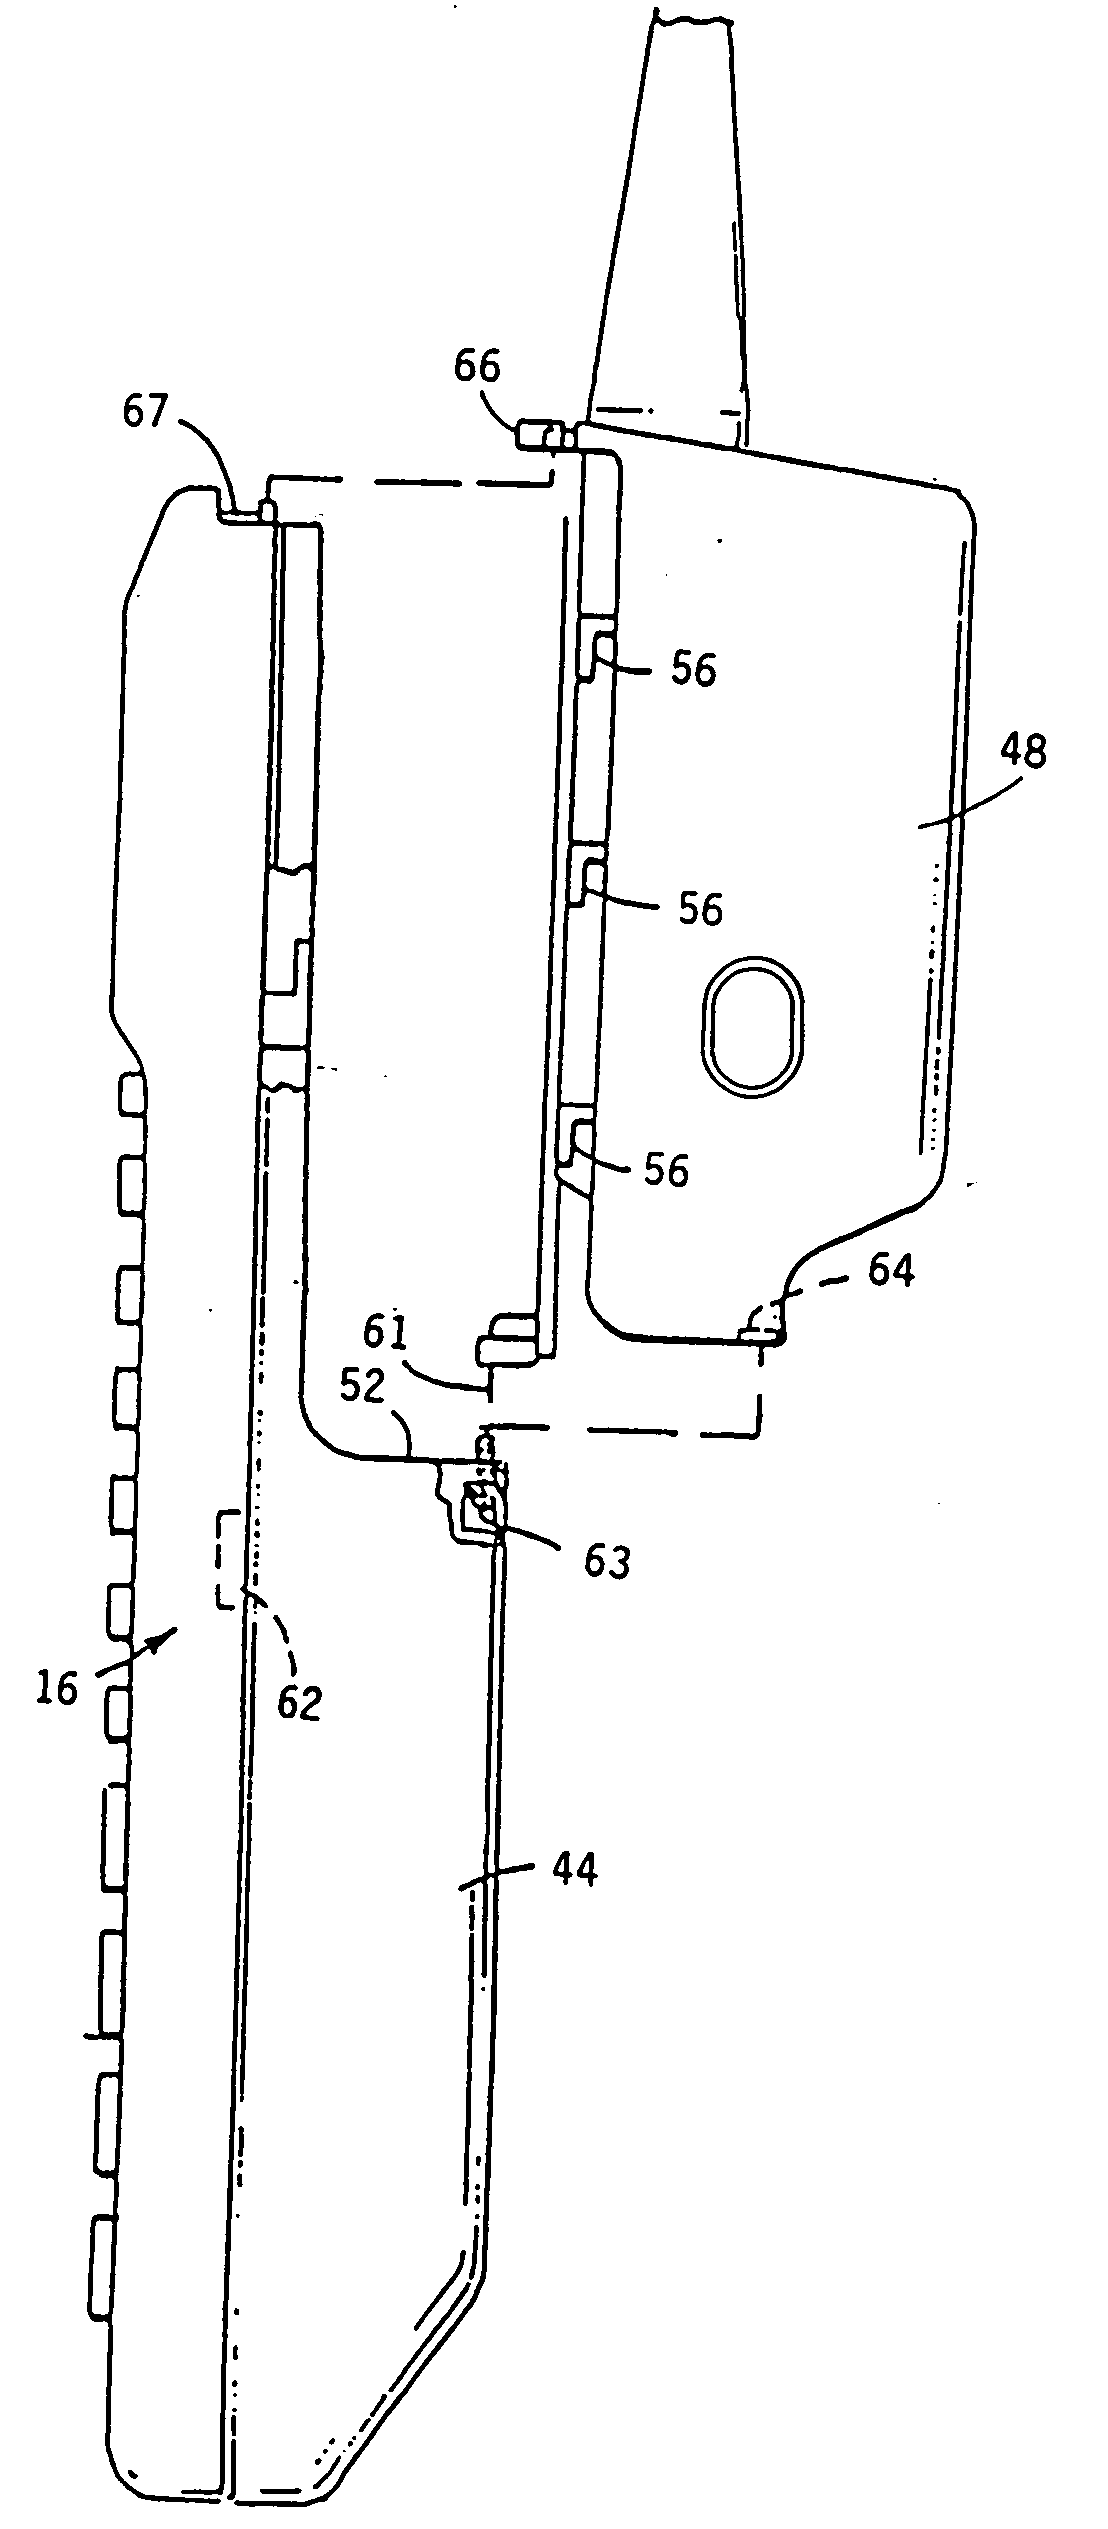 Laser scanner module having integral interface with hand-held data capture terminal, proximity and label sensing, and enhanced sensitivity and power efficiency